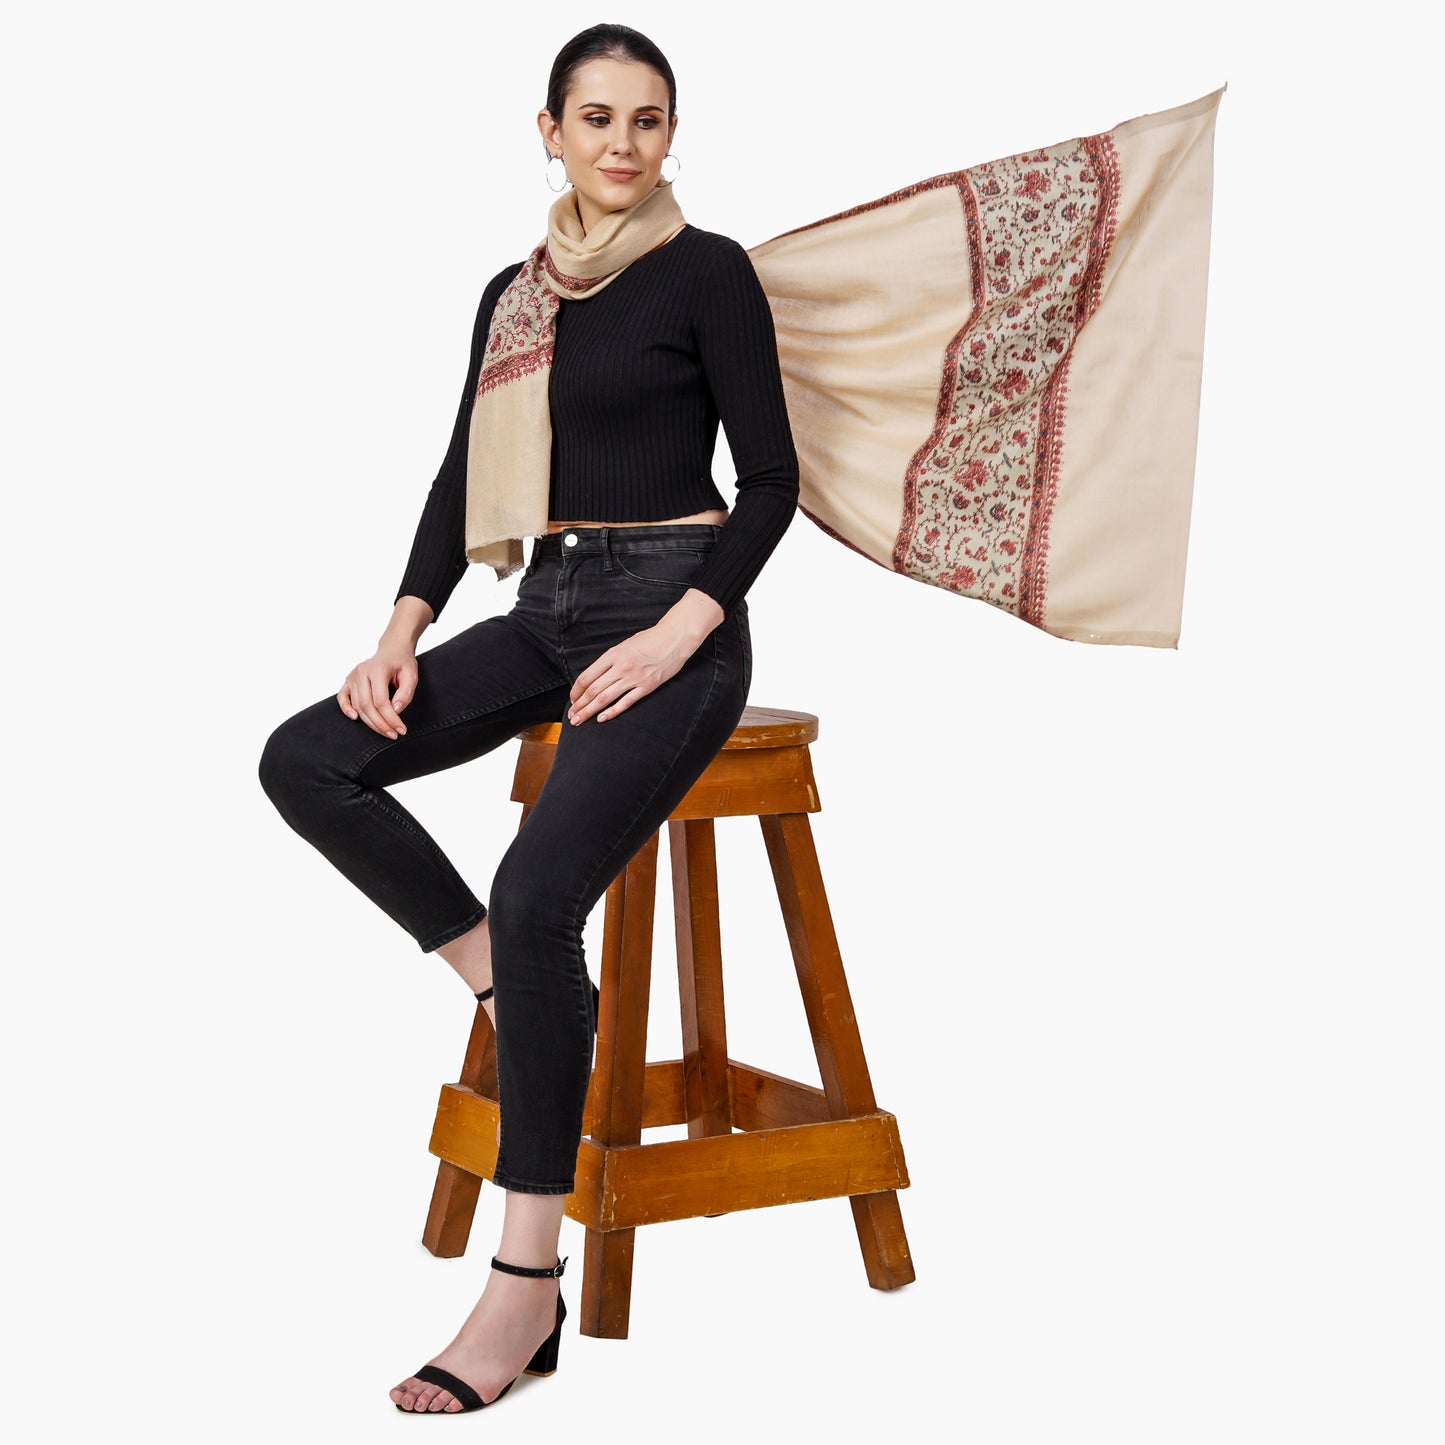 Cashmere Pashmina Embroidered Scarf (Beige)